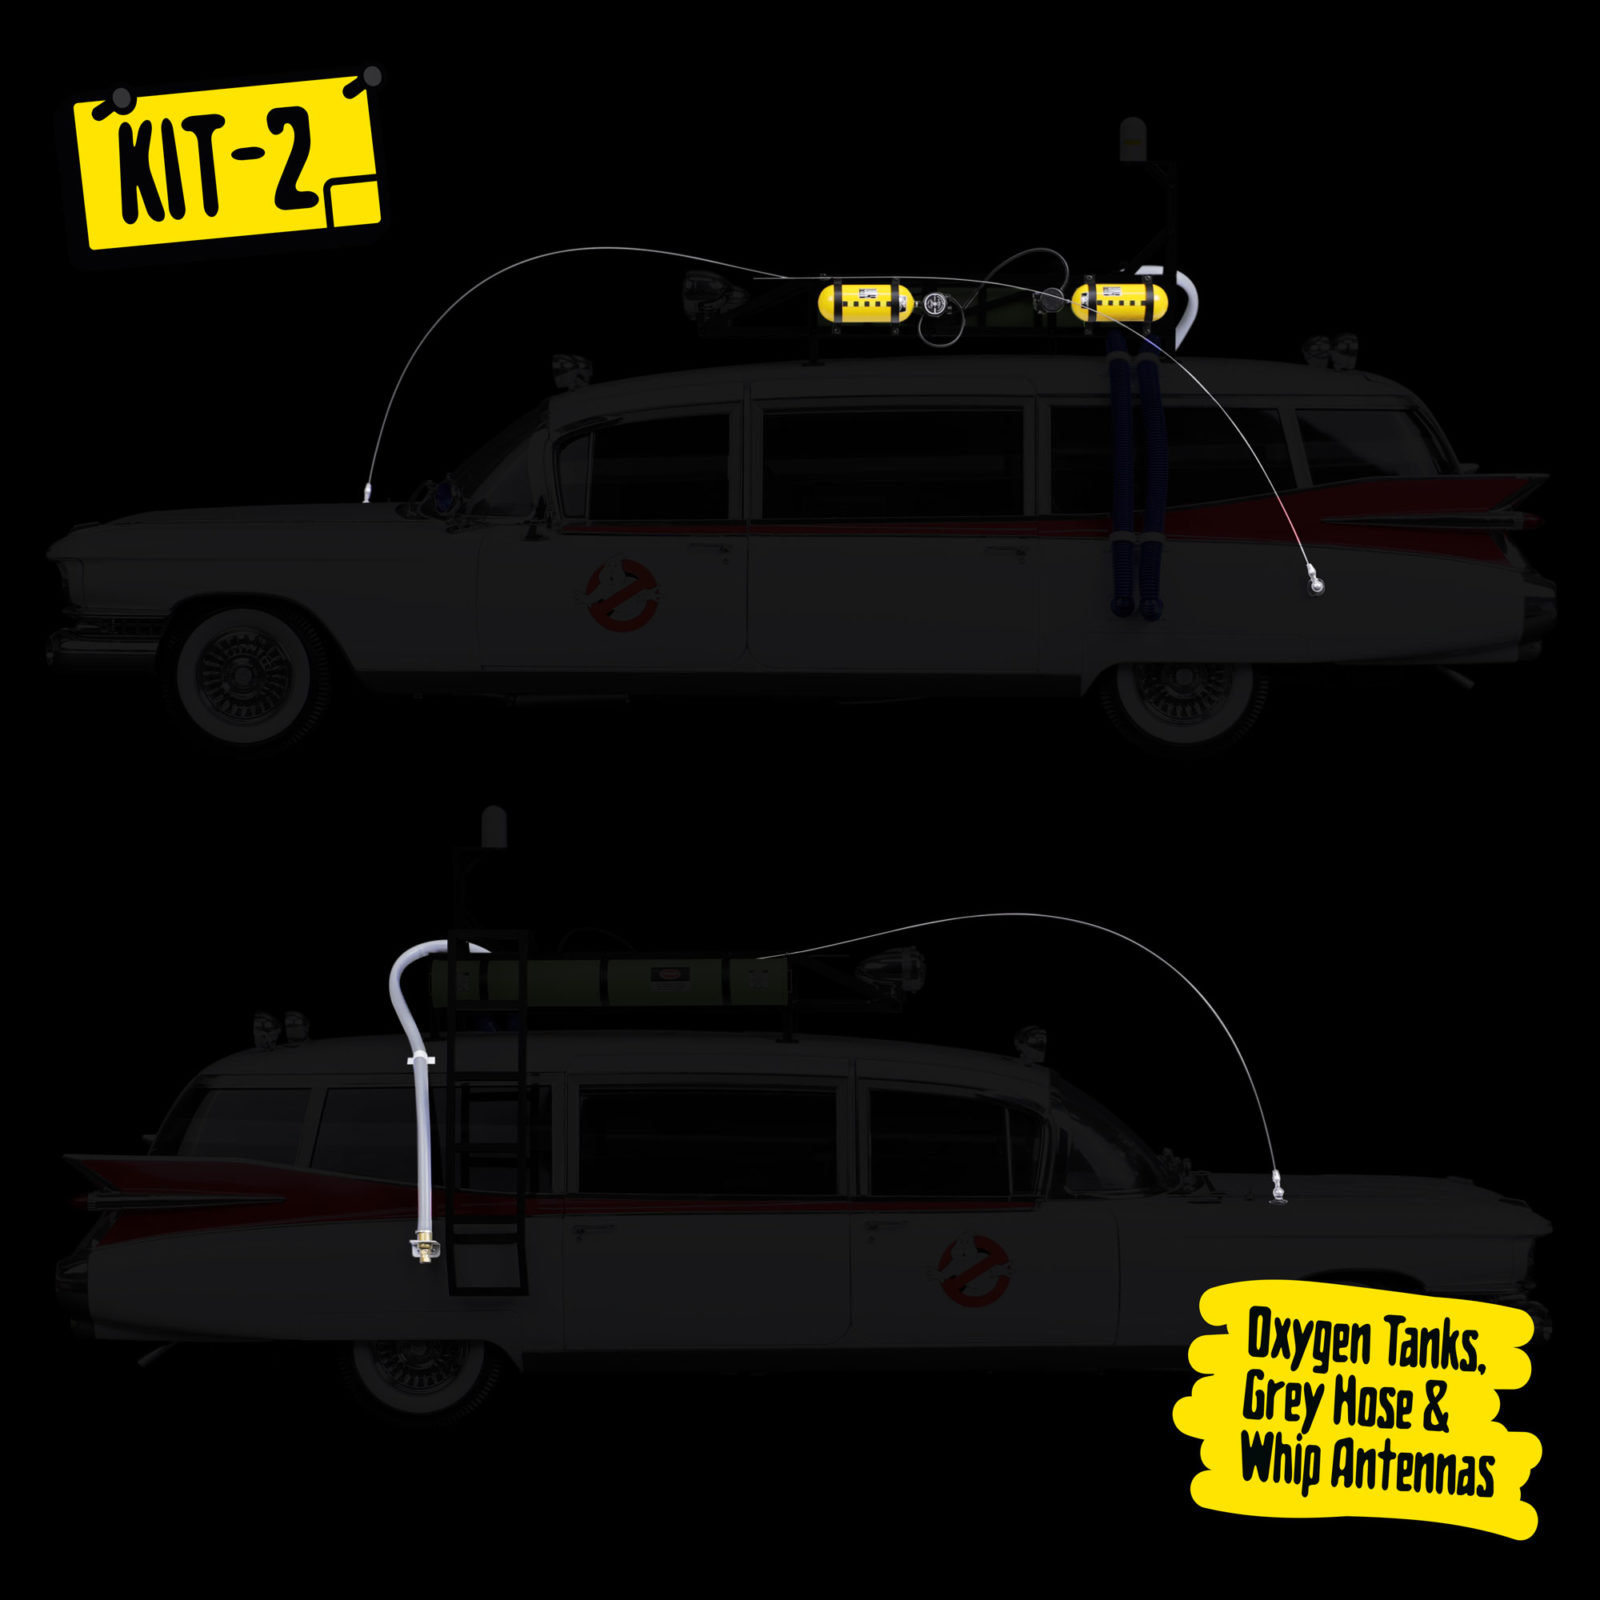 Where Resurrect the Ecto-1 Kit-2 items are fitted on the model